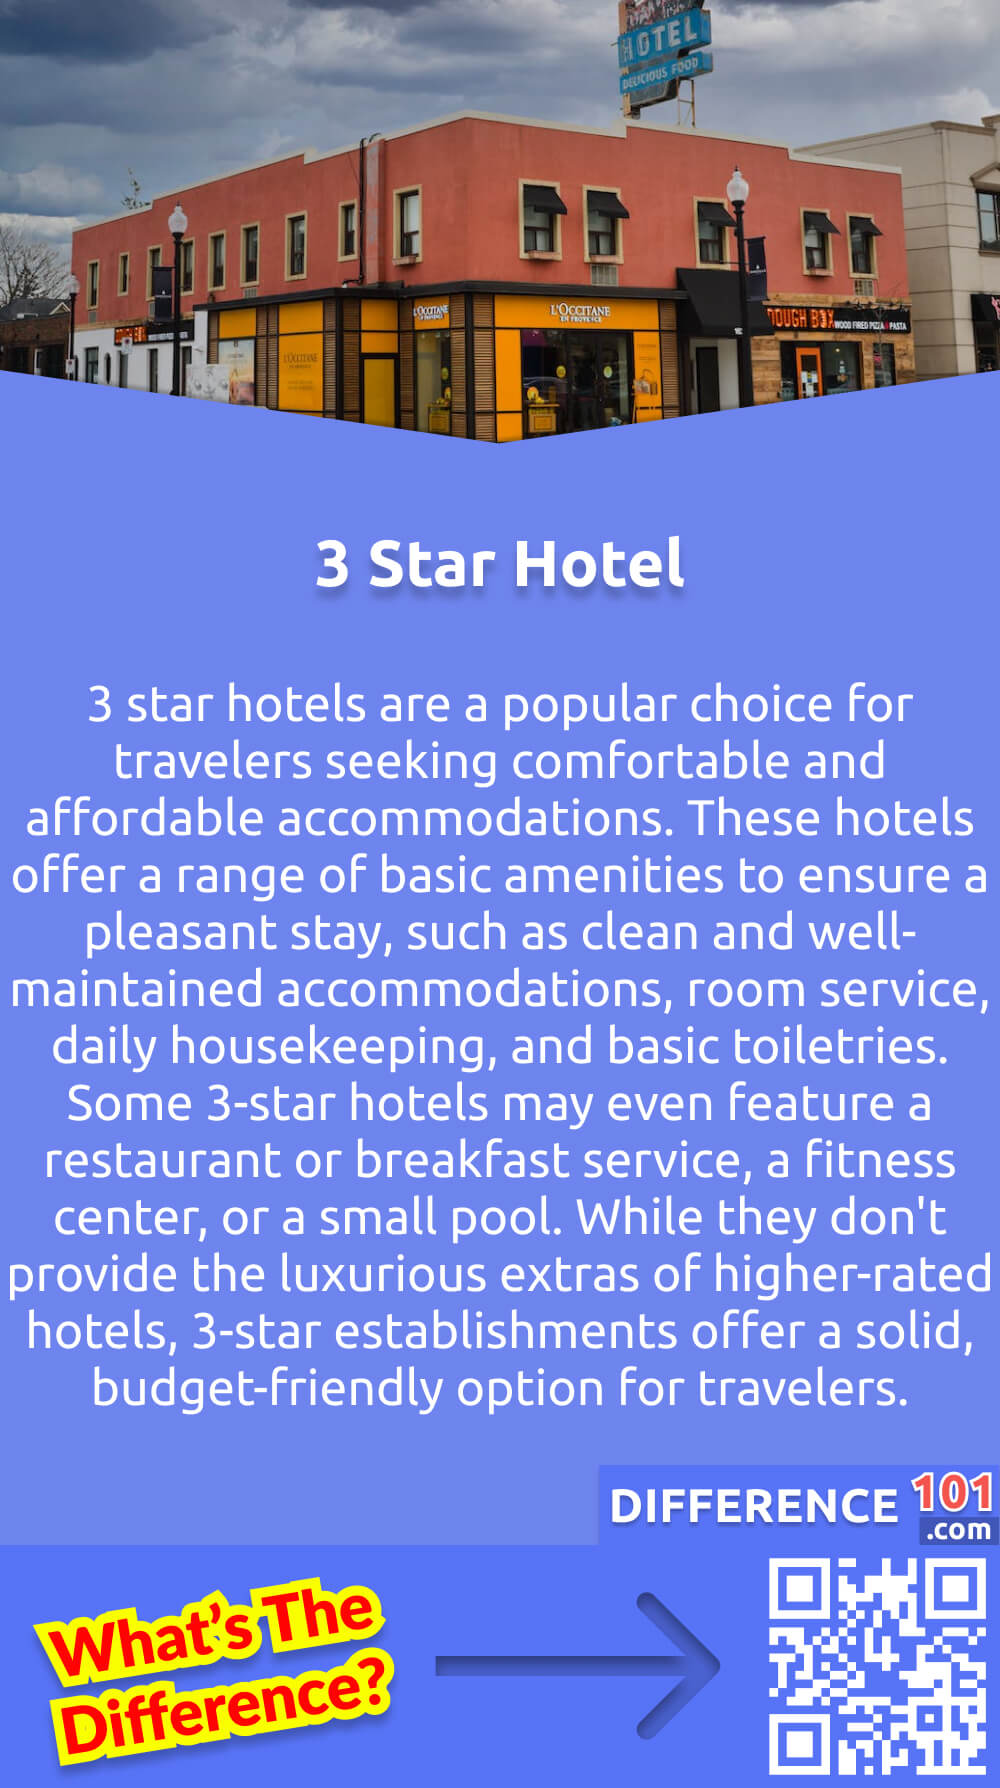 What Is a 3 Star Hotel? 3 star hotels are a popular choice for travelers seeking comfortable and affordable accommodations. These hotels offer a range of basic amenities to ensure a pleasant stay, such as clean and well-maintained accommodations, room service, daily housekeeping, and basic toiletries. Some 3-star hotels may even feature a restaurant or breakfast service, a fitness center, or a small pool. While they don't provide the luxurious extras of higher-rated hotels, 3-star establishments offer a solid, budget-friendly option for travelers. Whether for business or leisure, these hotels provide a comfortable and convenient stay without breaking the bank.